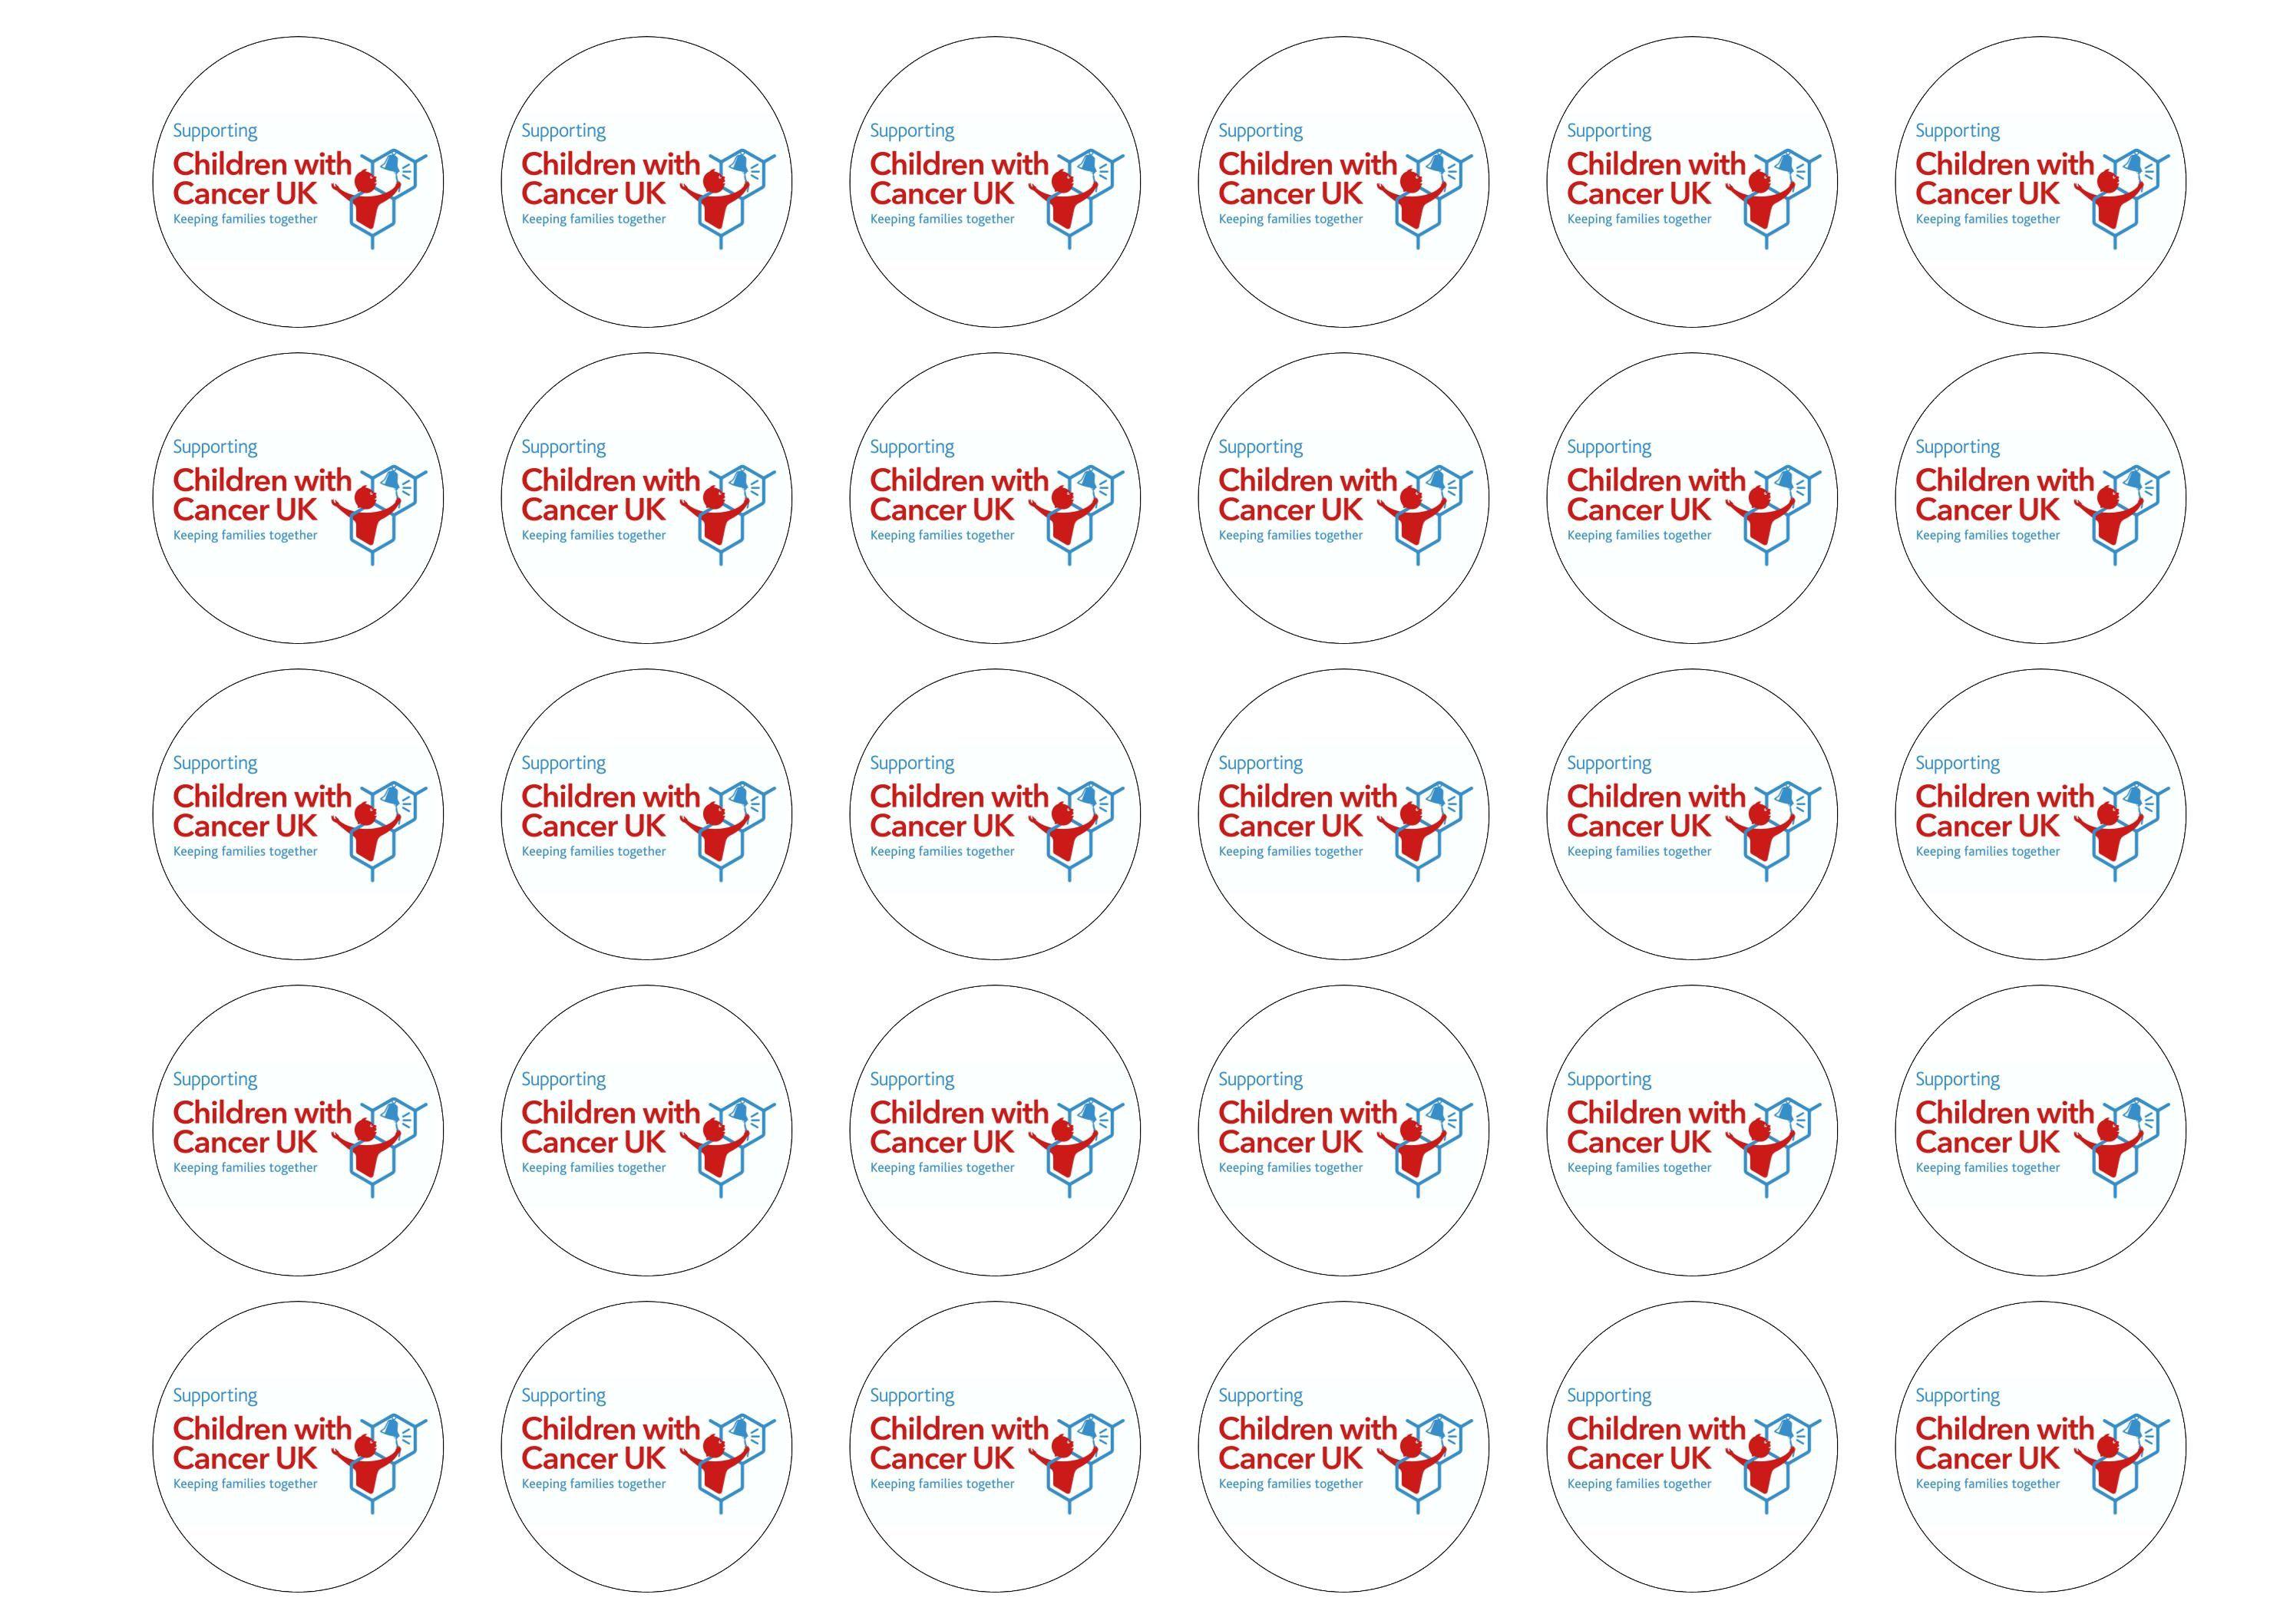 30 edible cupcake toppers for supporting Children with Cancer UK